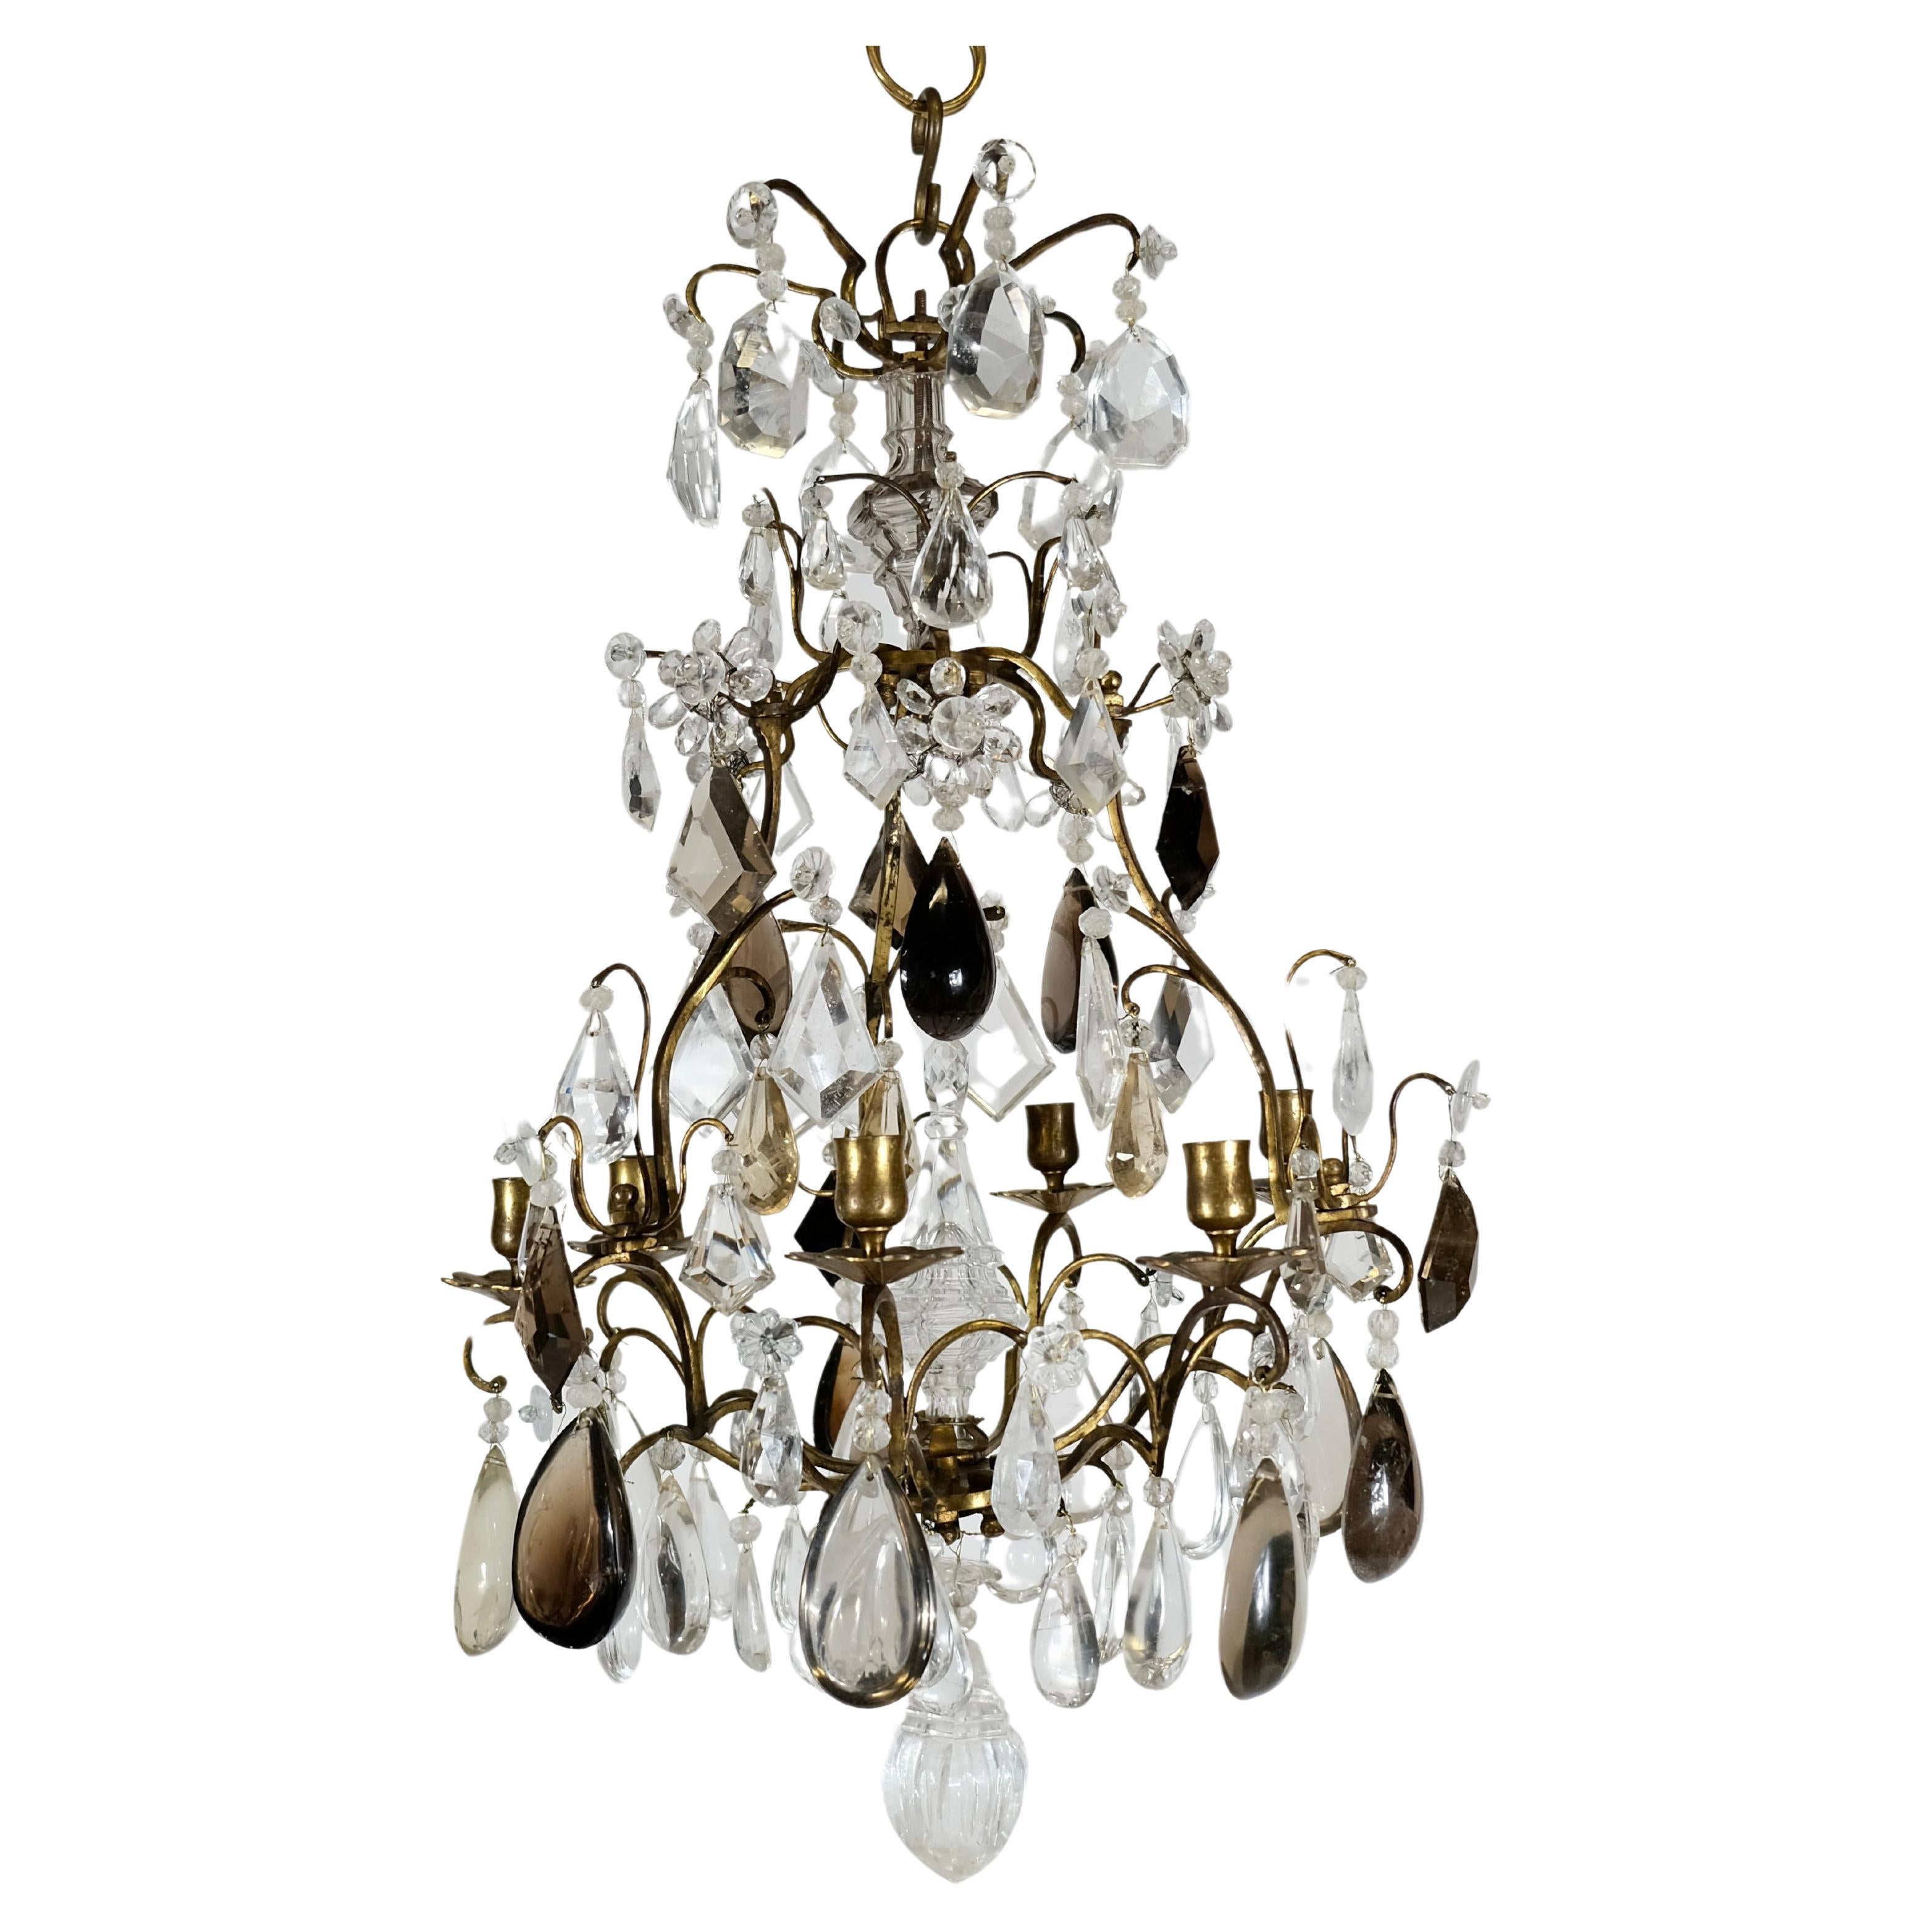 Small Baroque Style Chandelier with Exquisite Rock Crystals. 19th c.